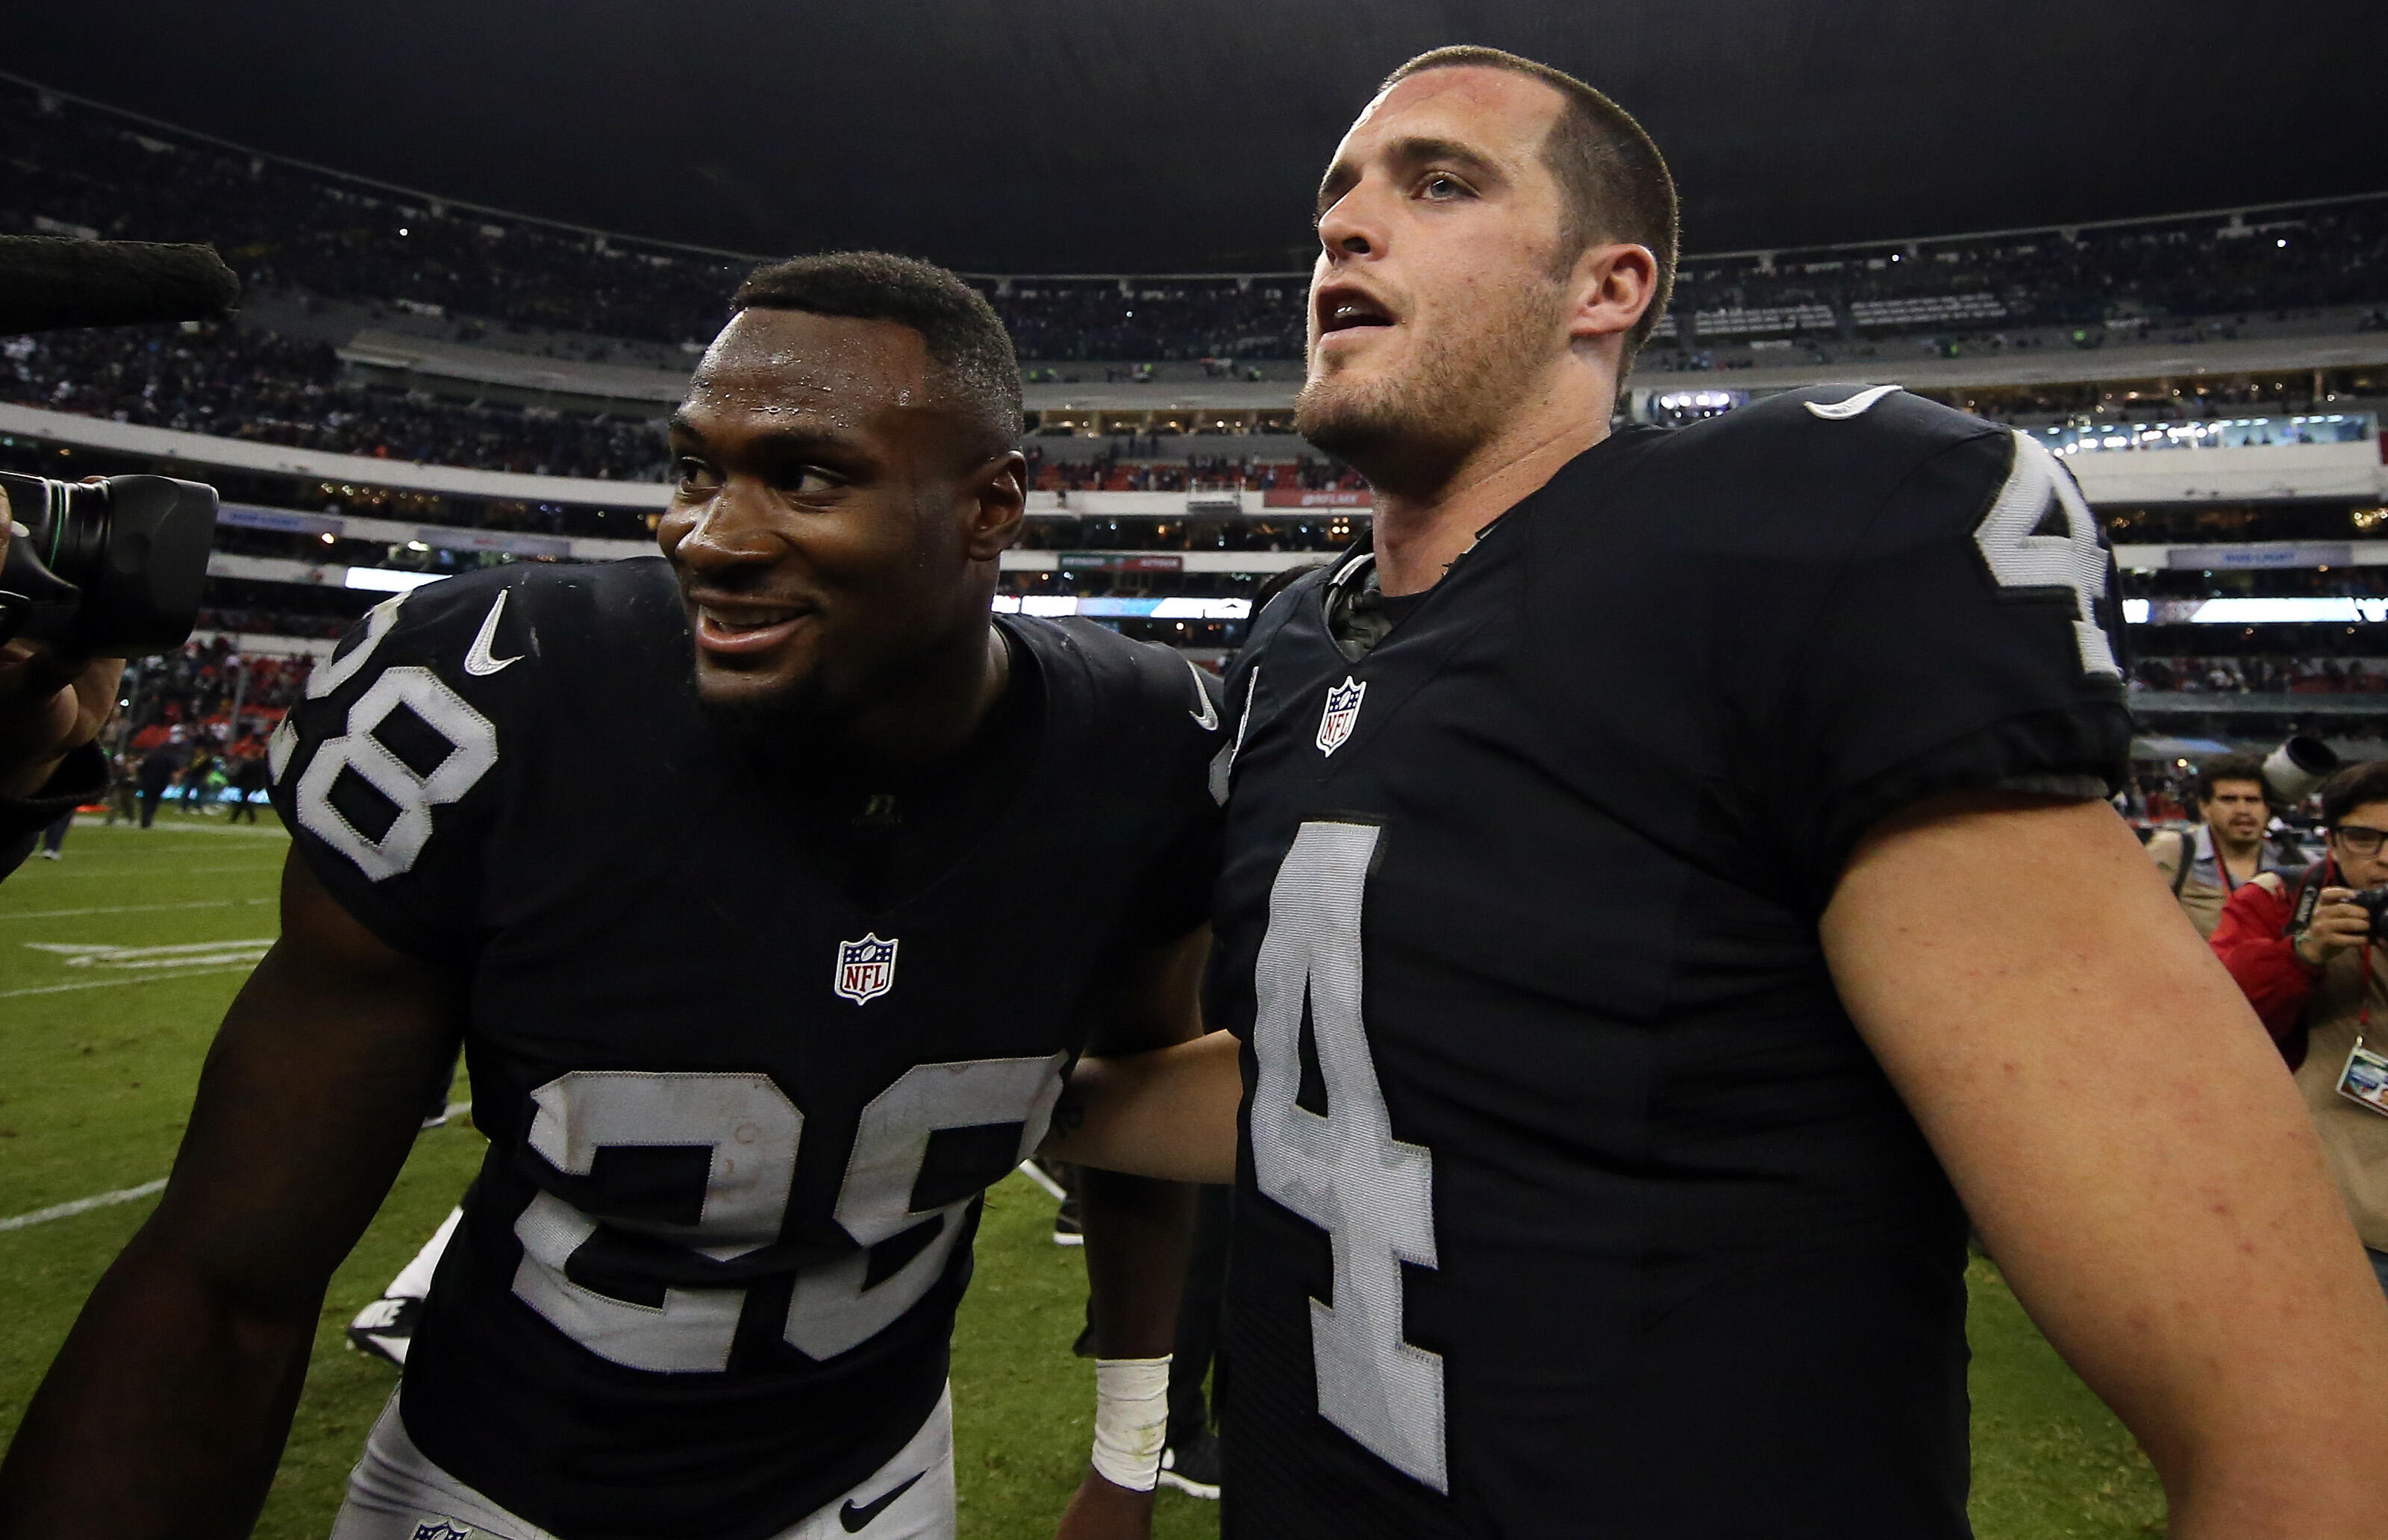 MEXICO CITY, MEXICO - NOVEMBER 21:   Latavius Murray #28 and Derek Carr #4 of the Oakland Raiders celebrate after defeating the Houston Texans at Estadio Azteca on November 21, 2016 in Mexico City, Mexico.  (Photo by Buda Mendes/Getty Images)